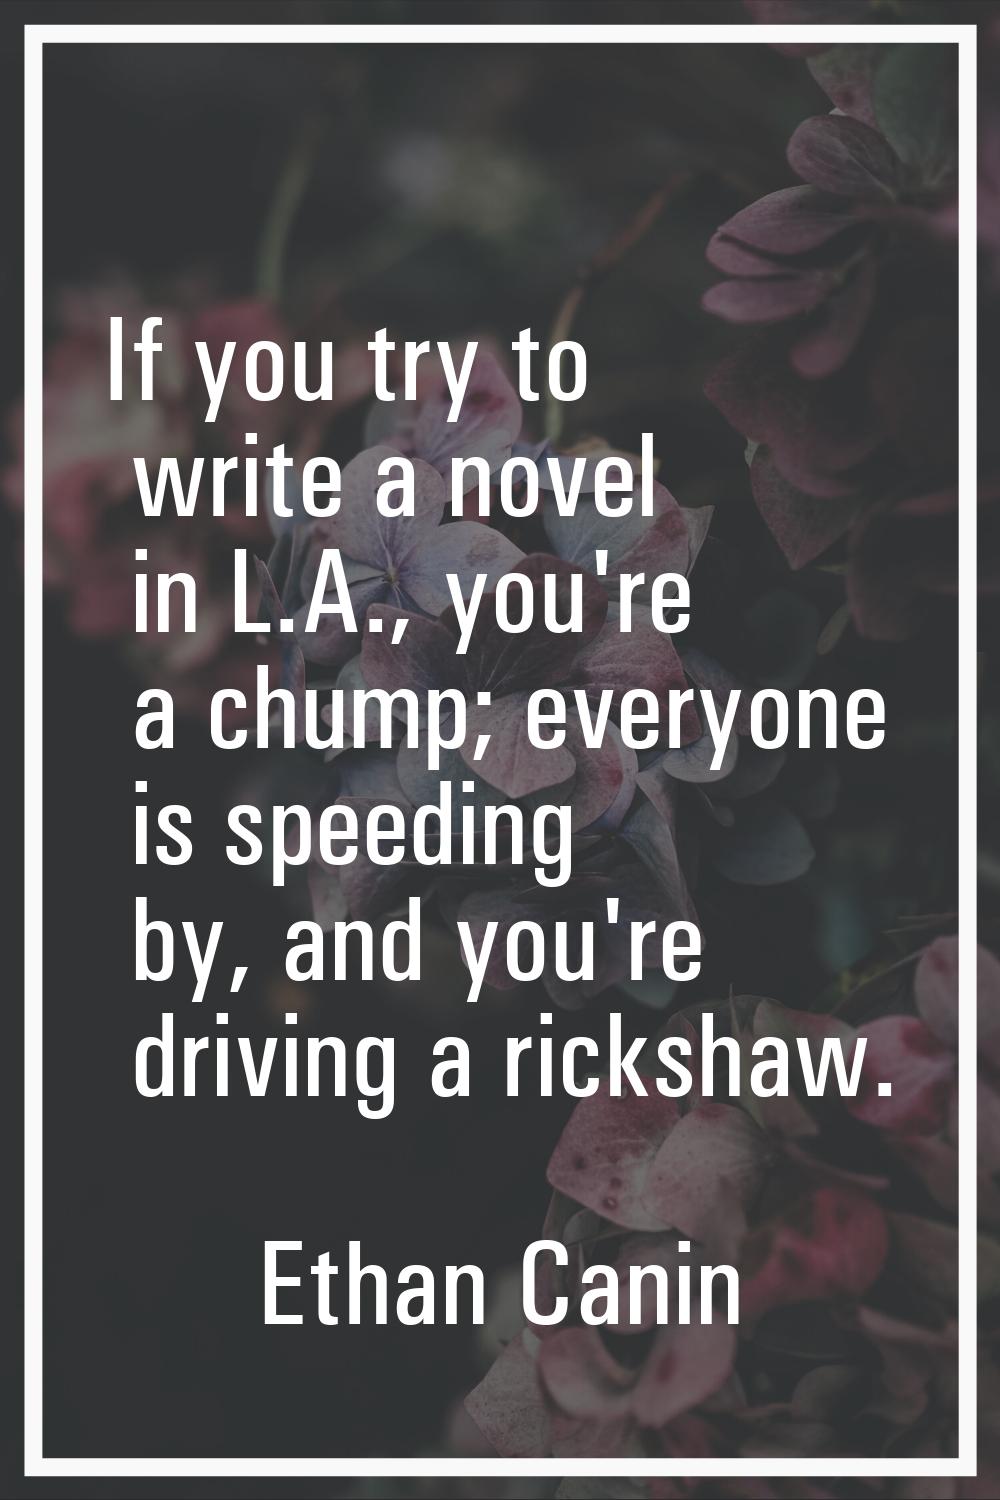 If you try to write a novel in L.A., you're a chump; everyone is speeding by, and you're driving a 